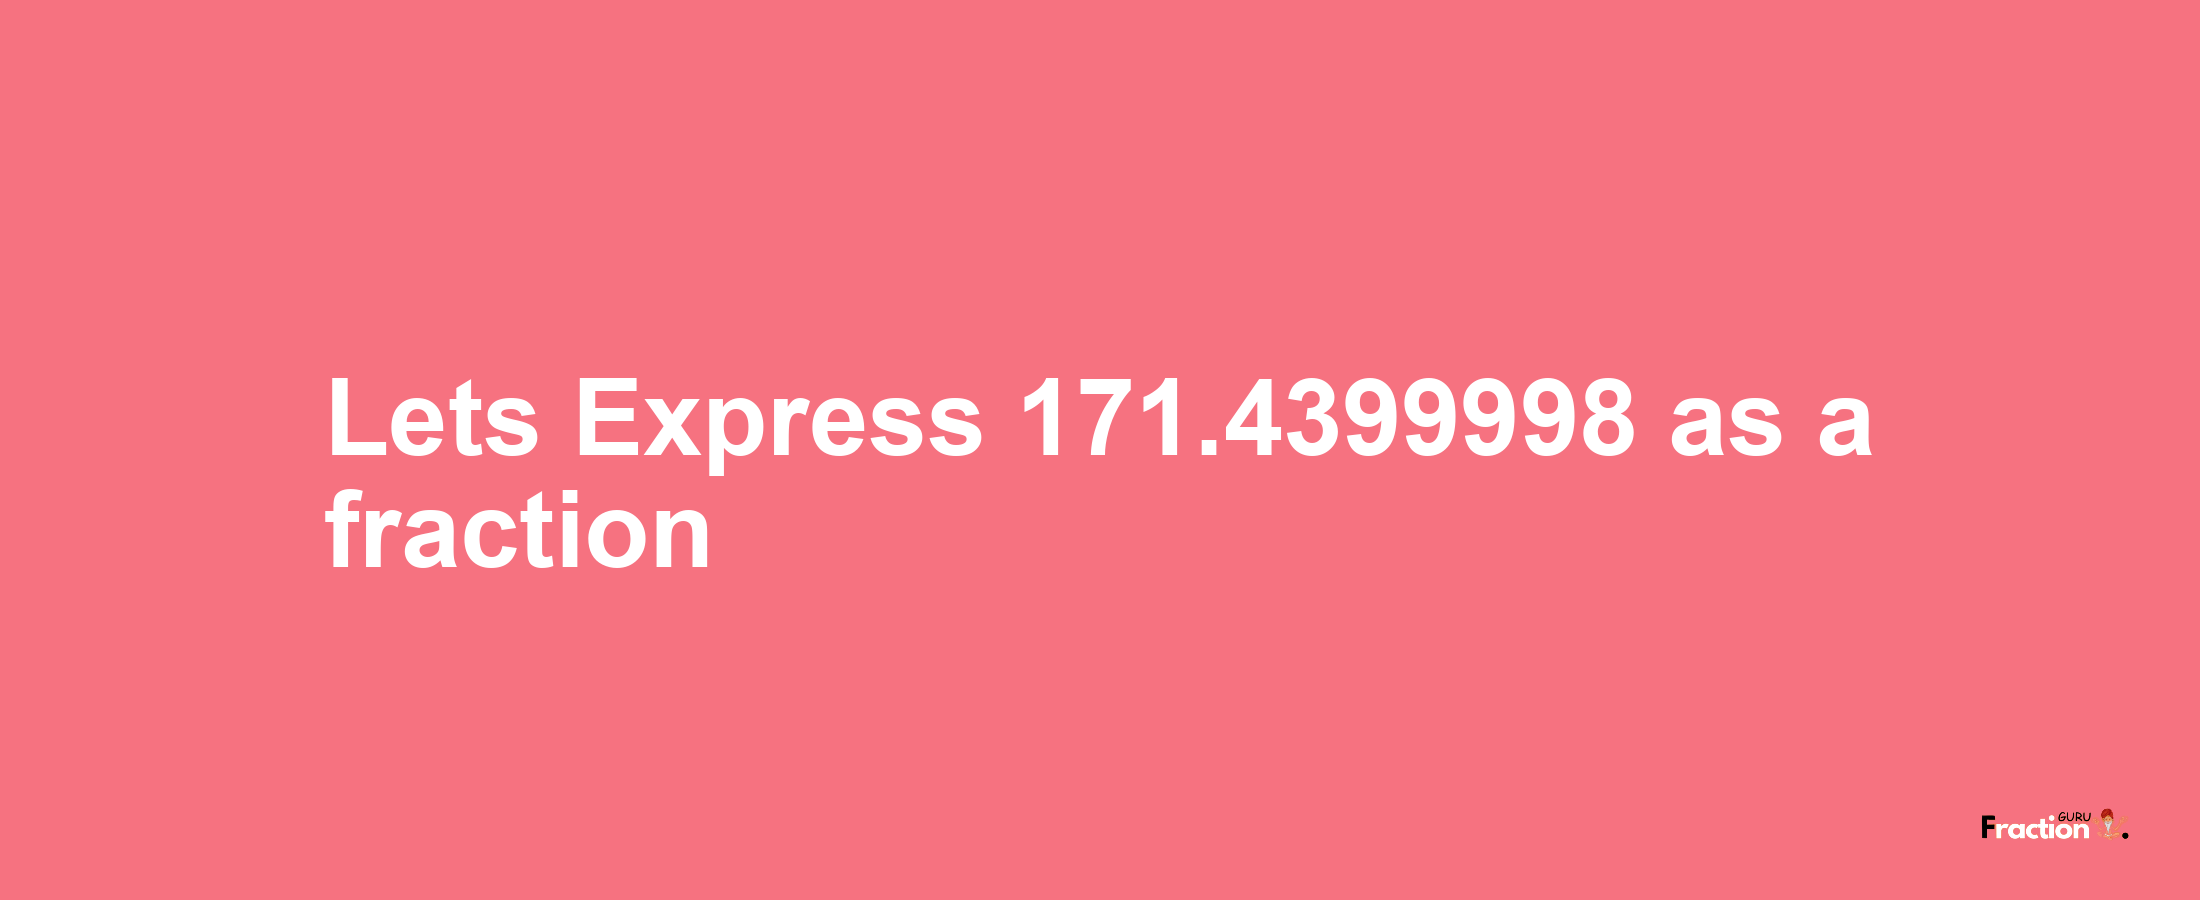 Lets Express 171.4399998 as afraction